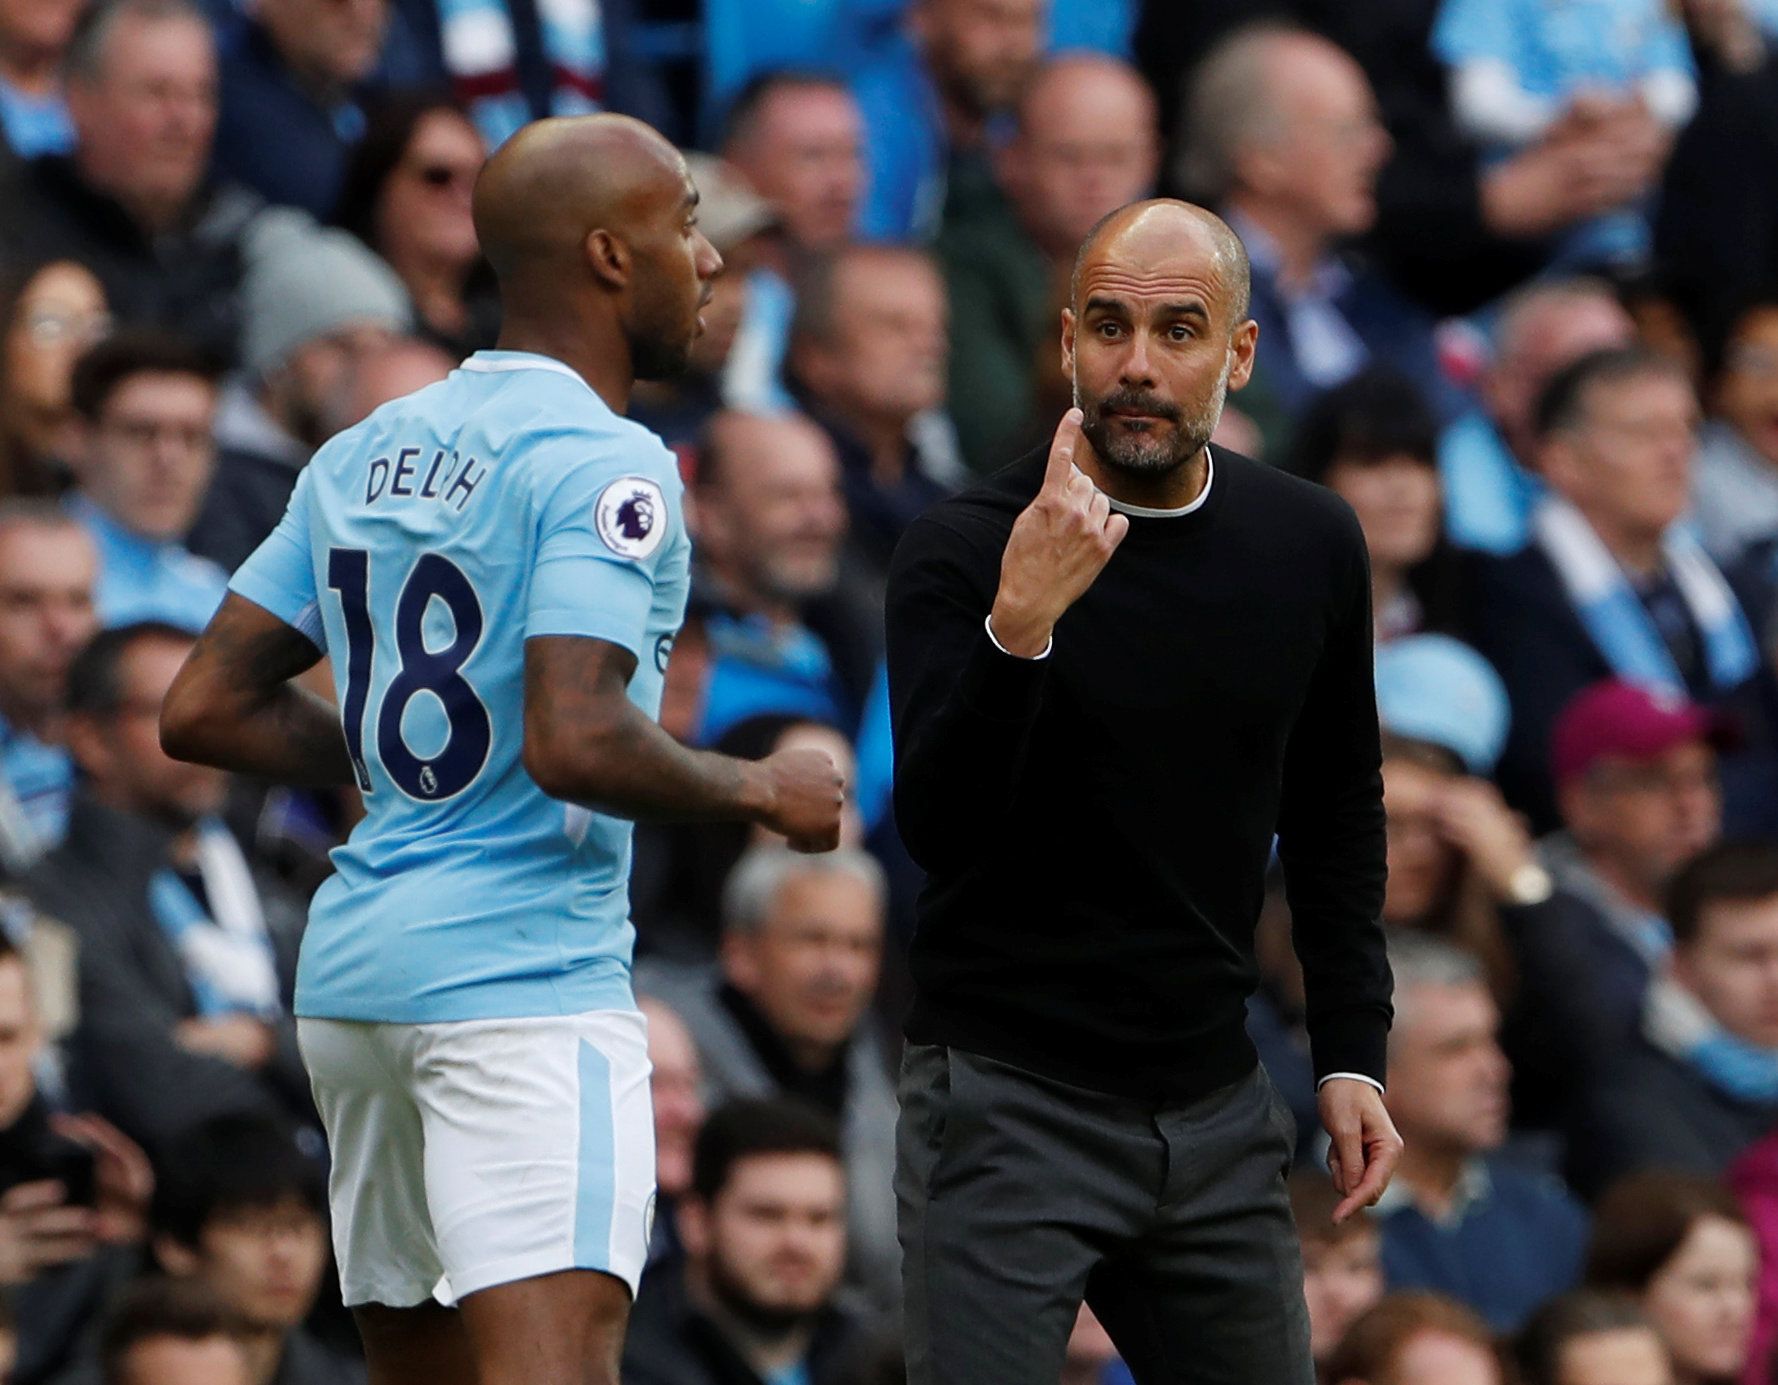 Pep Guardiola gives orders to Fabian Delph